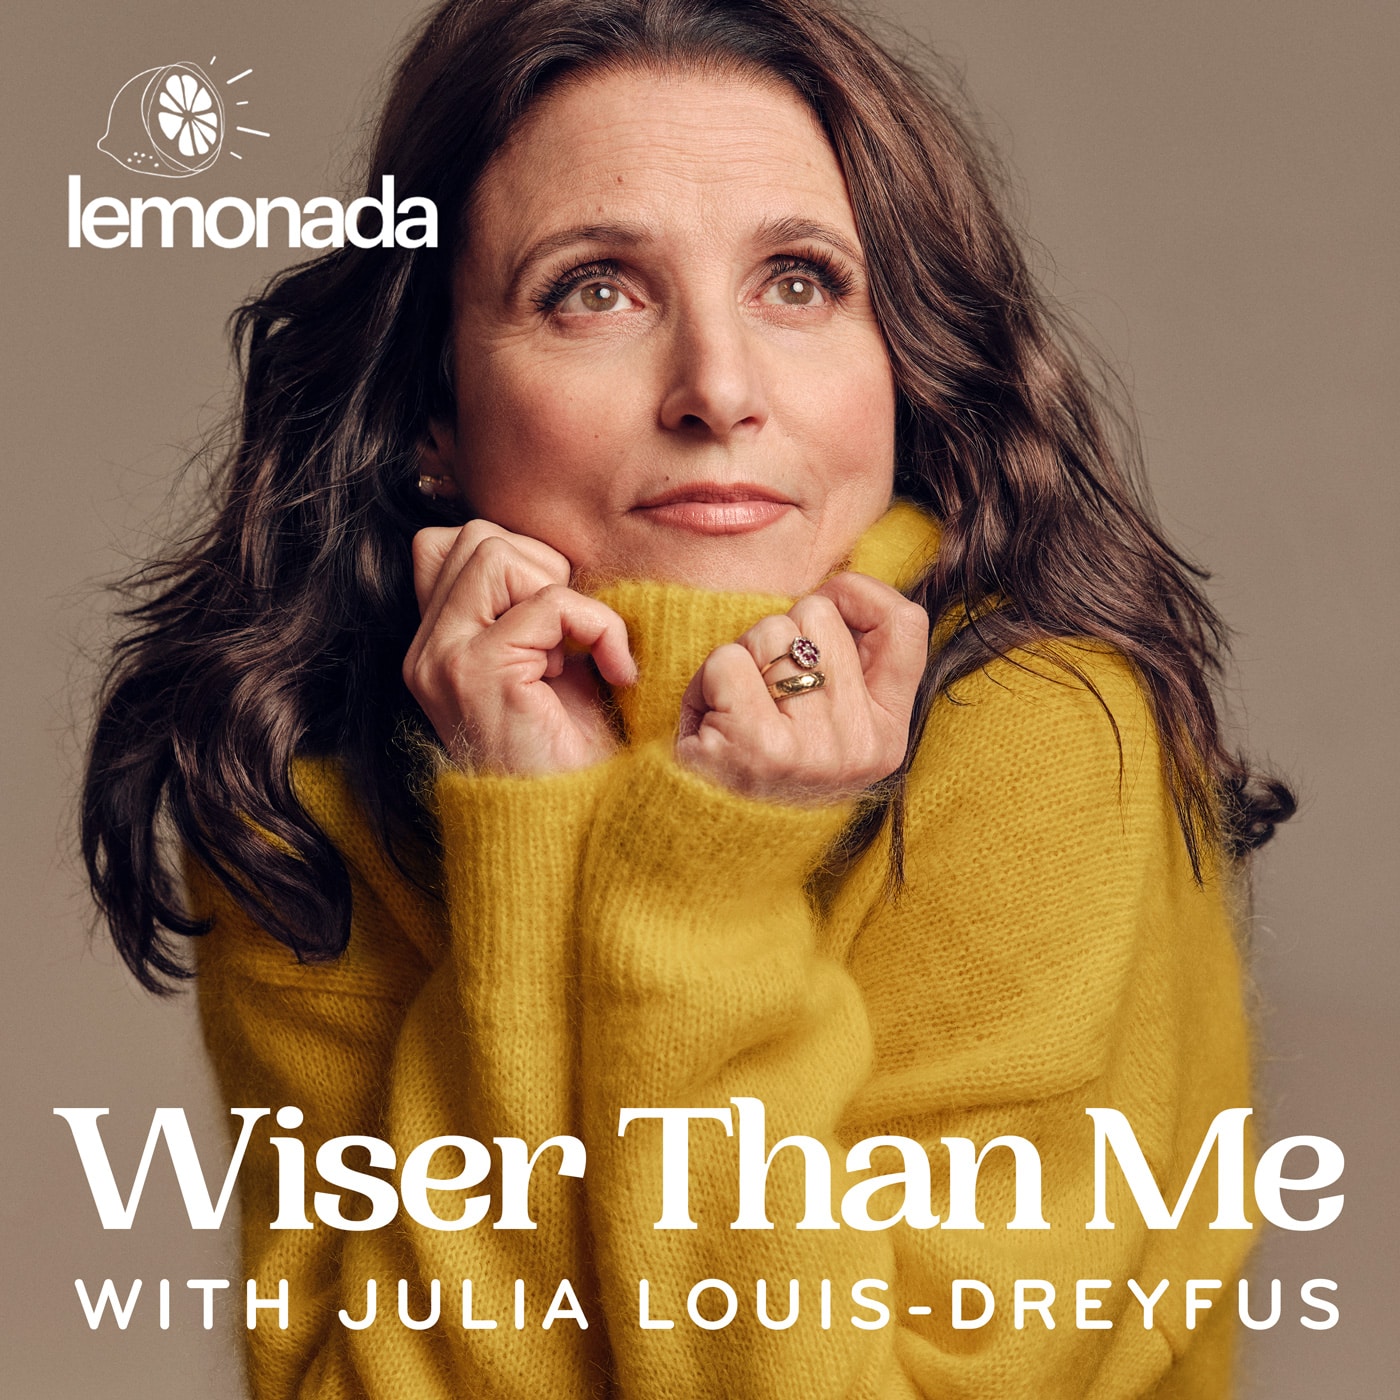 10 Reasons to Listen to Wiser Than Me for Enhanced Mental Wellness